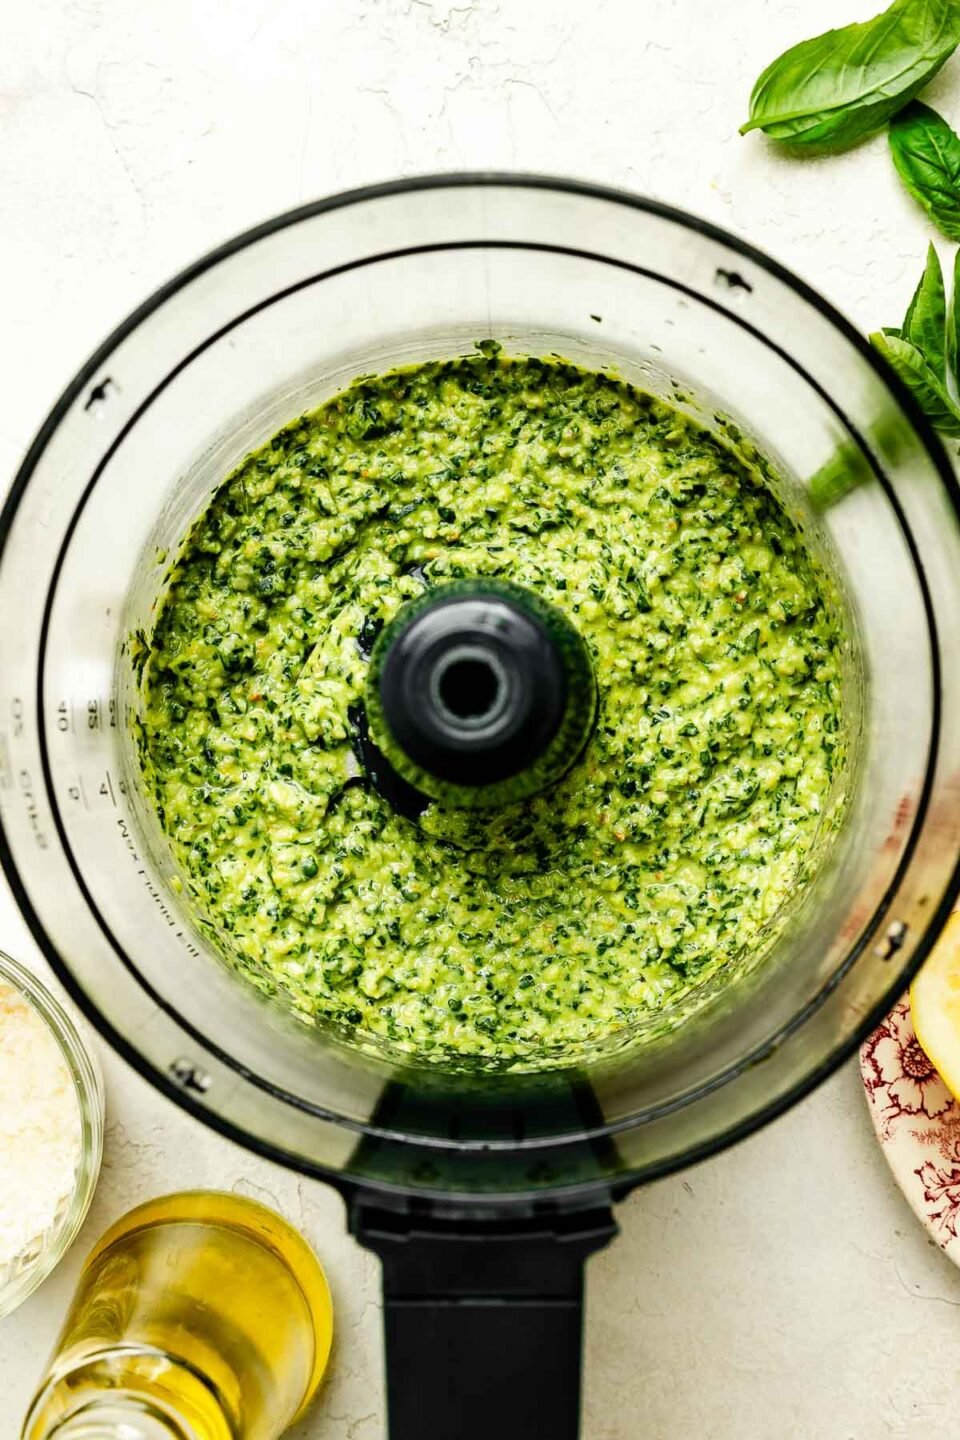 An overhead shot of a food processor full of lemon basil pesto atop a textured white surface. A bowl of grated parmesan, fresh basil leaves and olive oil sit alongside it.